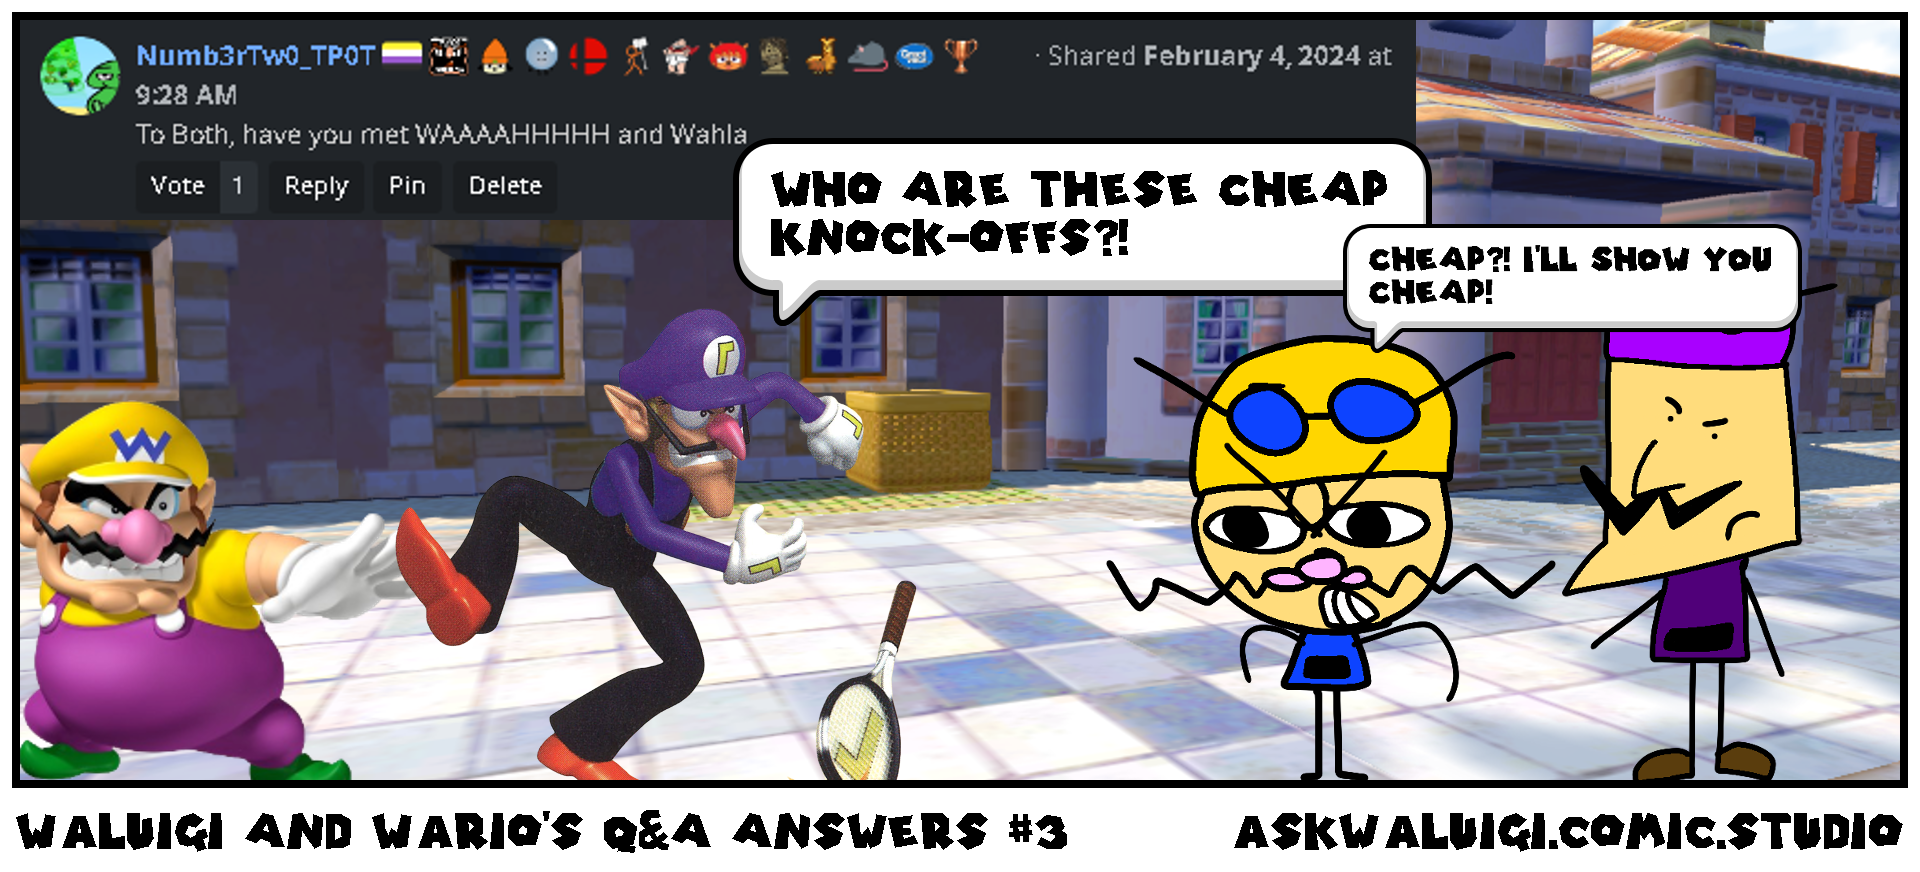 Waluigi And Wario's Q&A Answers #3